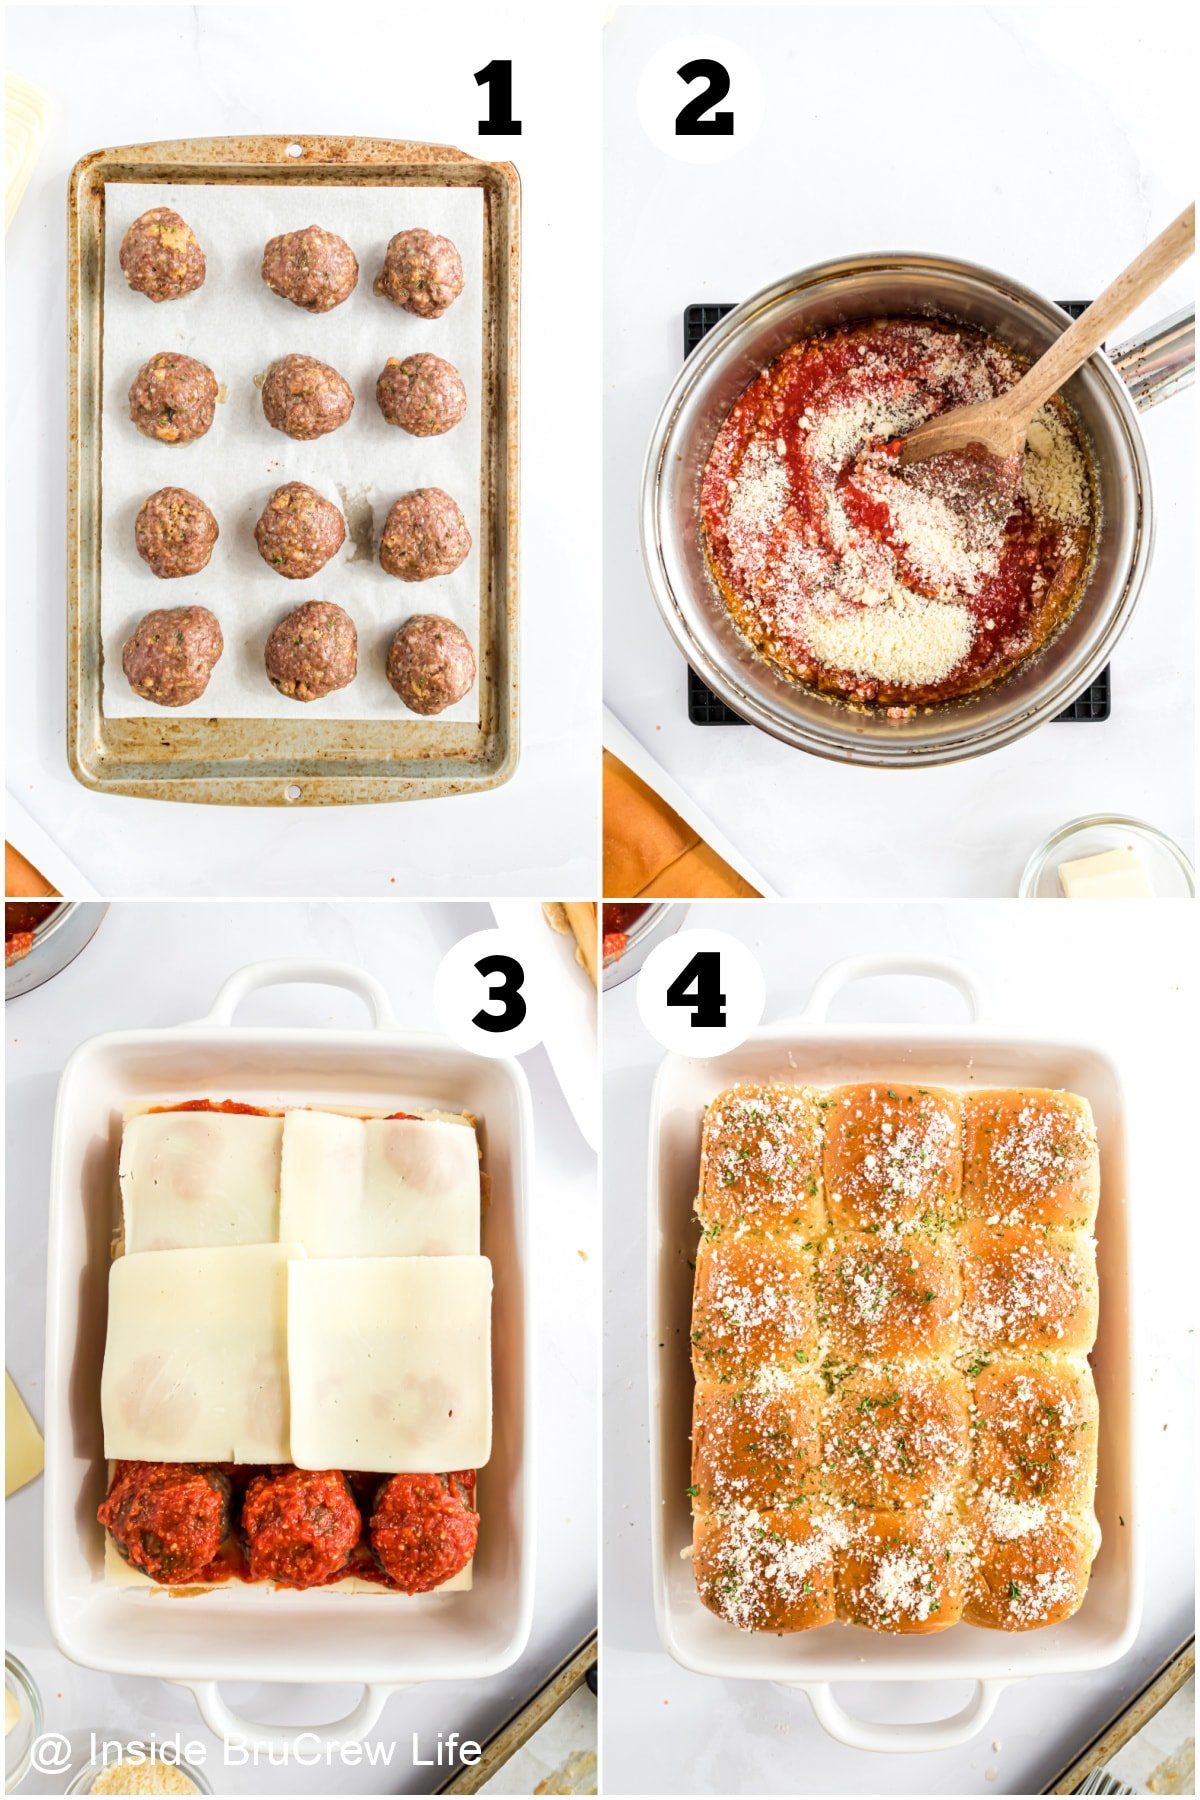 Four pictures collaged together showing how to make mini sandwiches with meatballs.